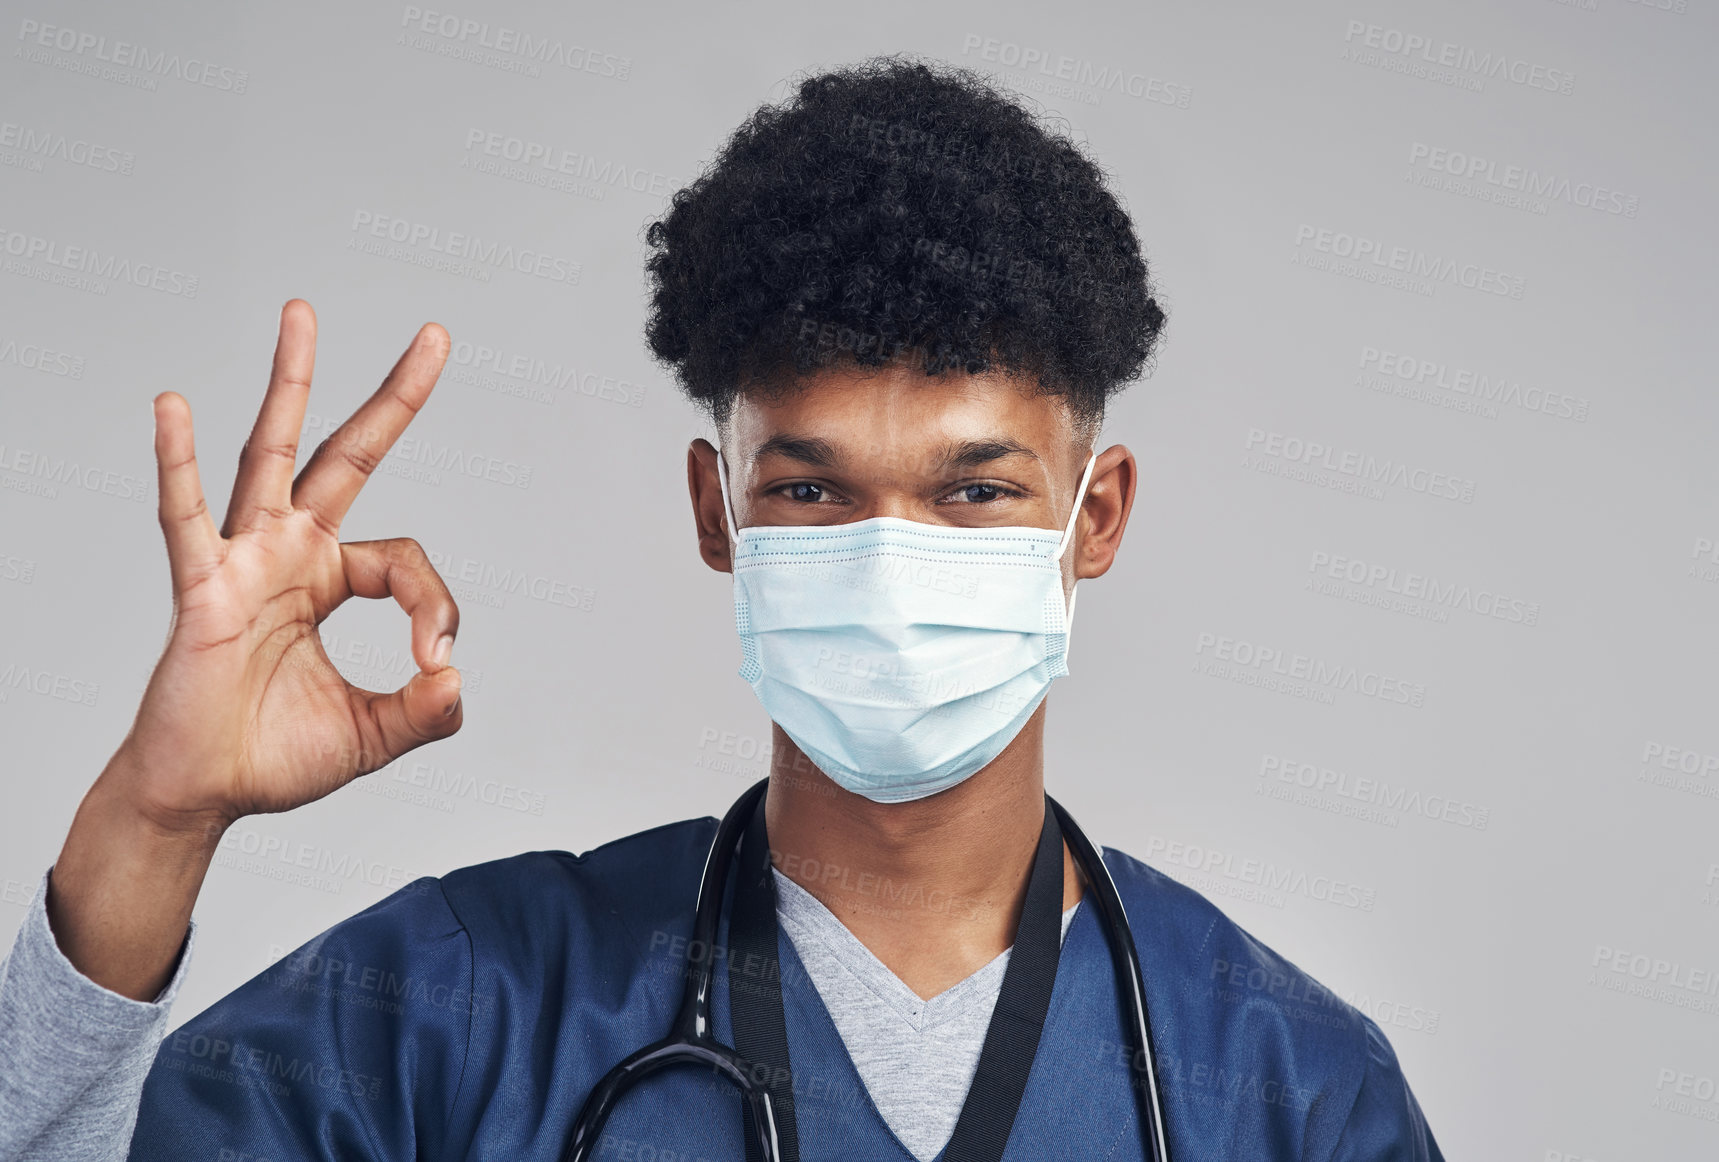 Buy stock photo Shot of a male nurse showing the ok sign while wearing a surgical mask